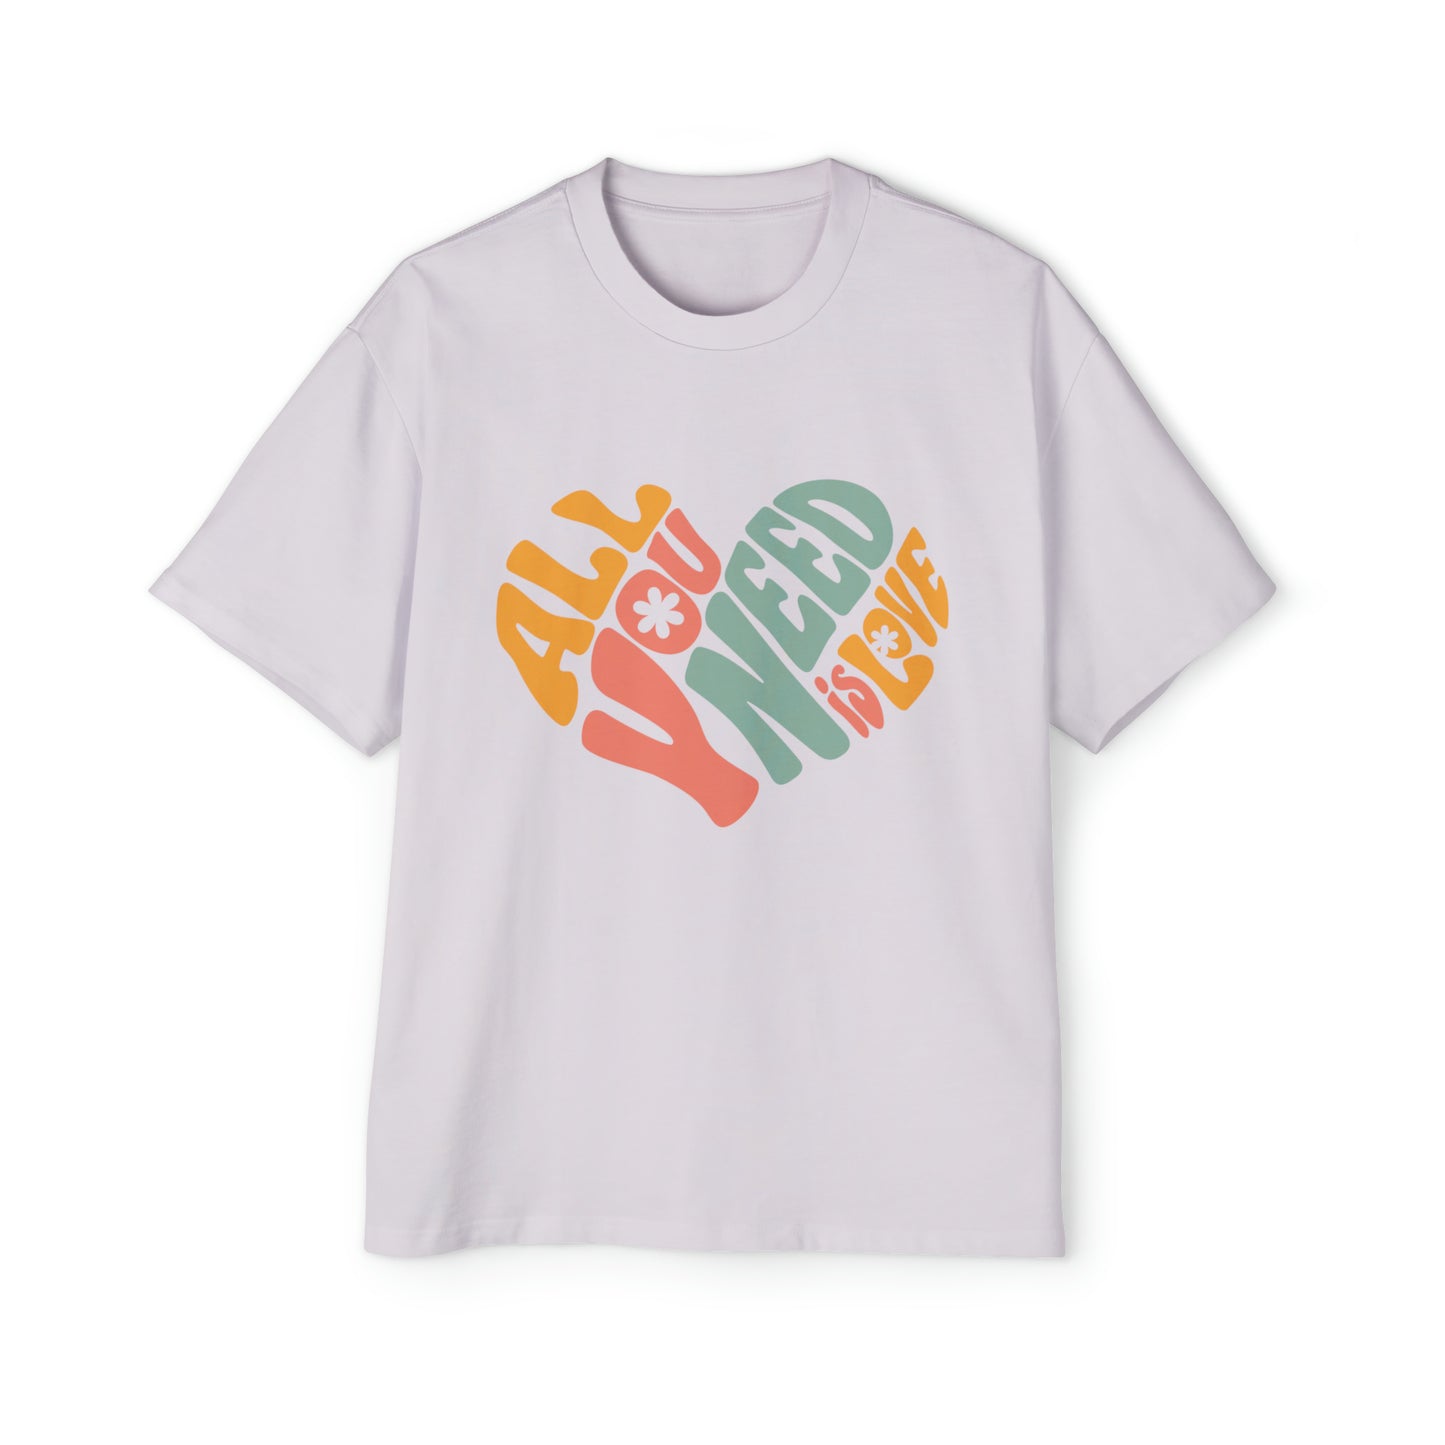 All You Need is Love Heavy Oversized Tee great gift for him or her. Great gift for Valentines Day, Birthdays or just because.